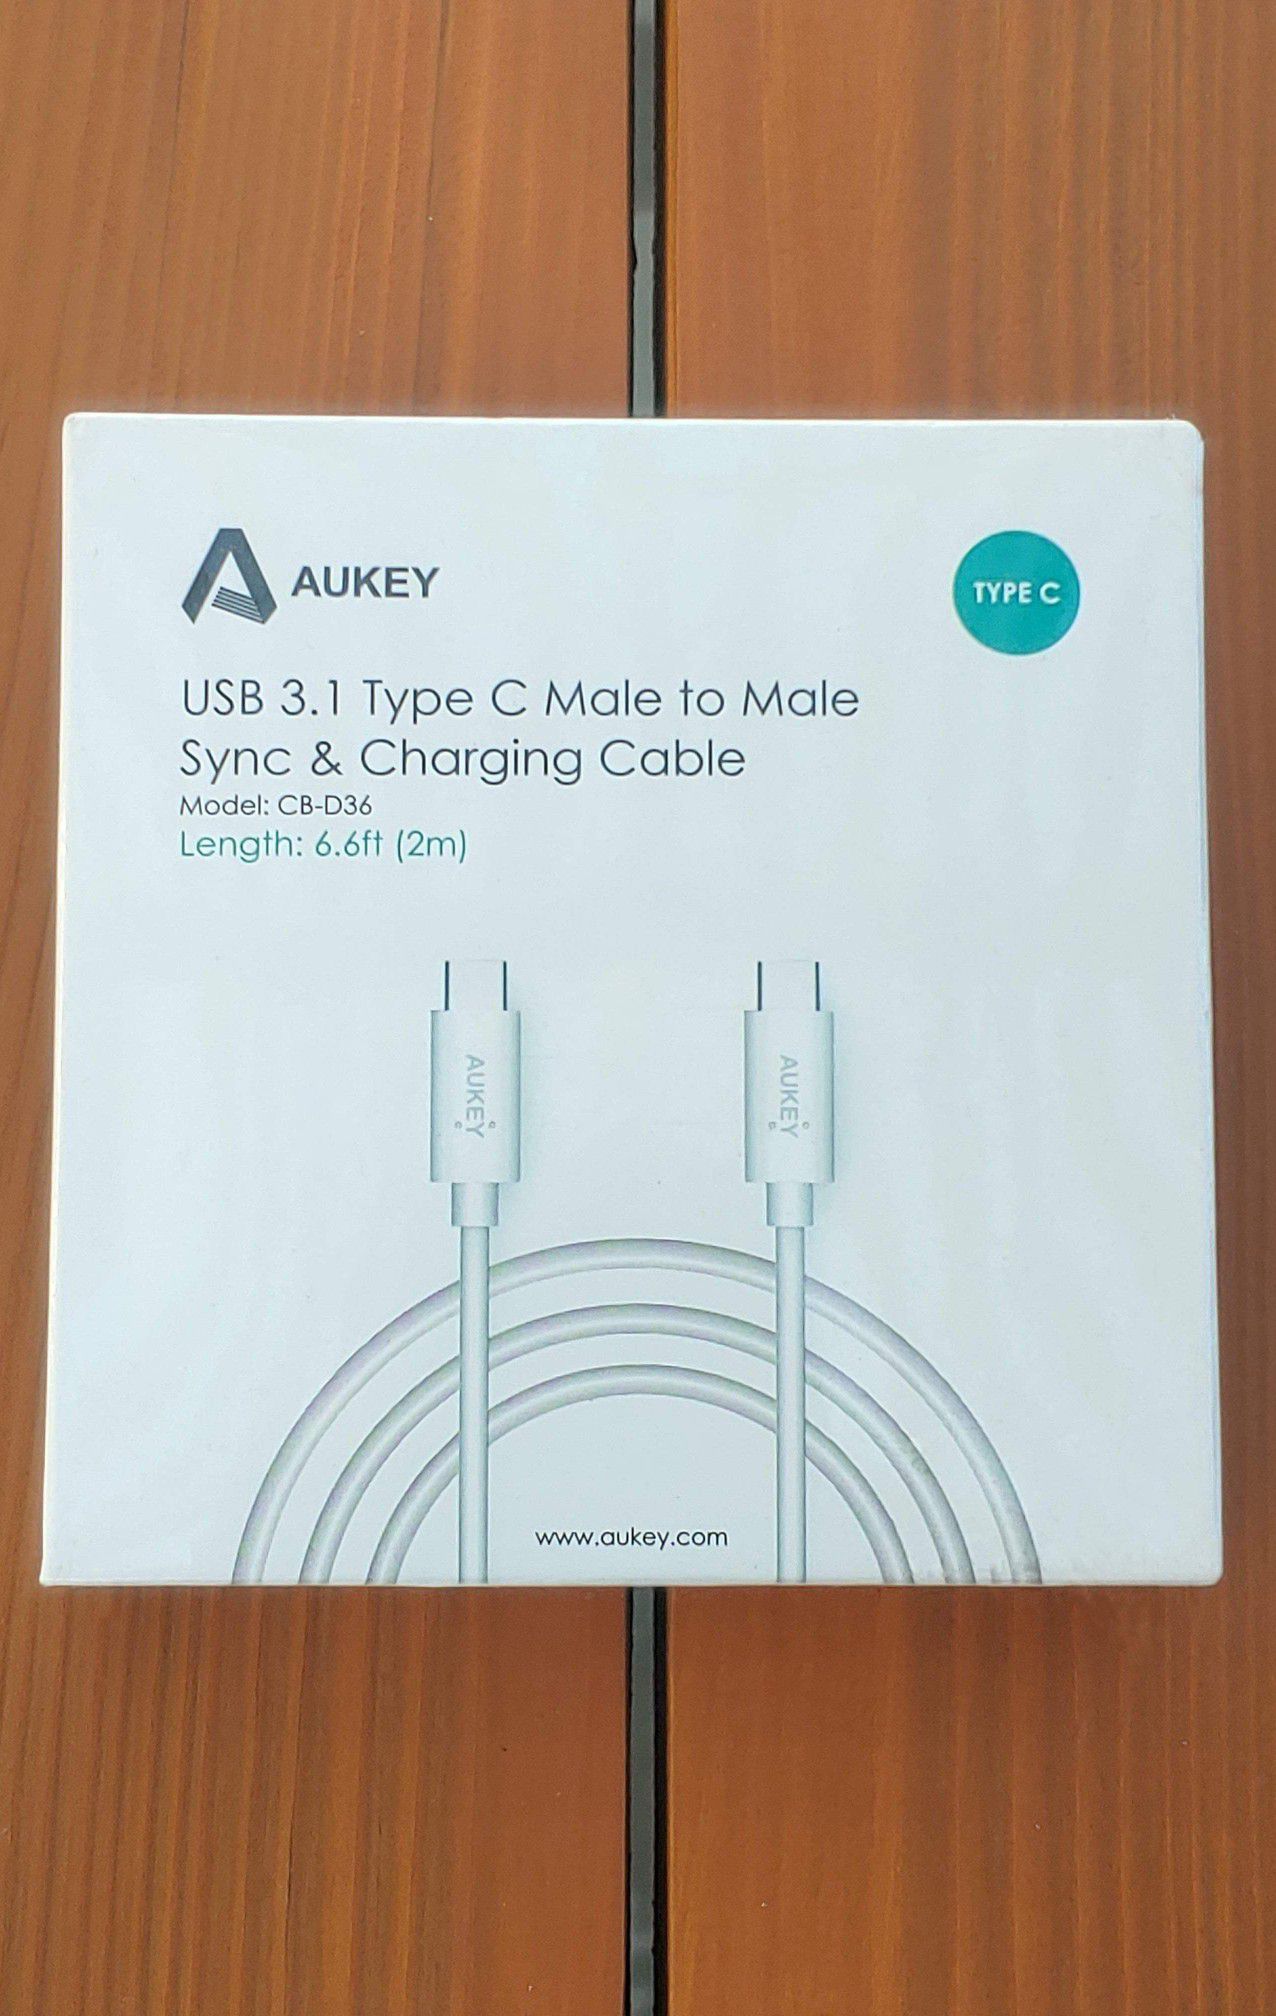 BRAND NEW Aukey USB 3.1 Type C to Type C Sync Cable Charging Cable de carga 6.6 feet 5V 3A USB-C to USB-C Phone Fast charge power wire data sync cable